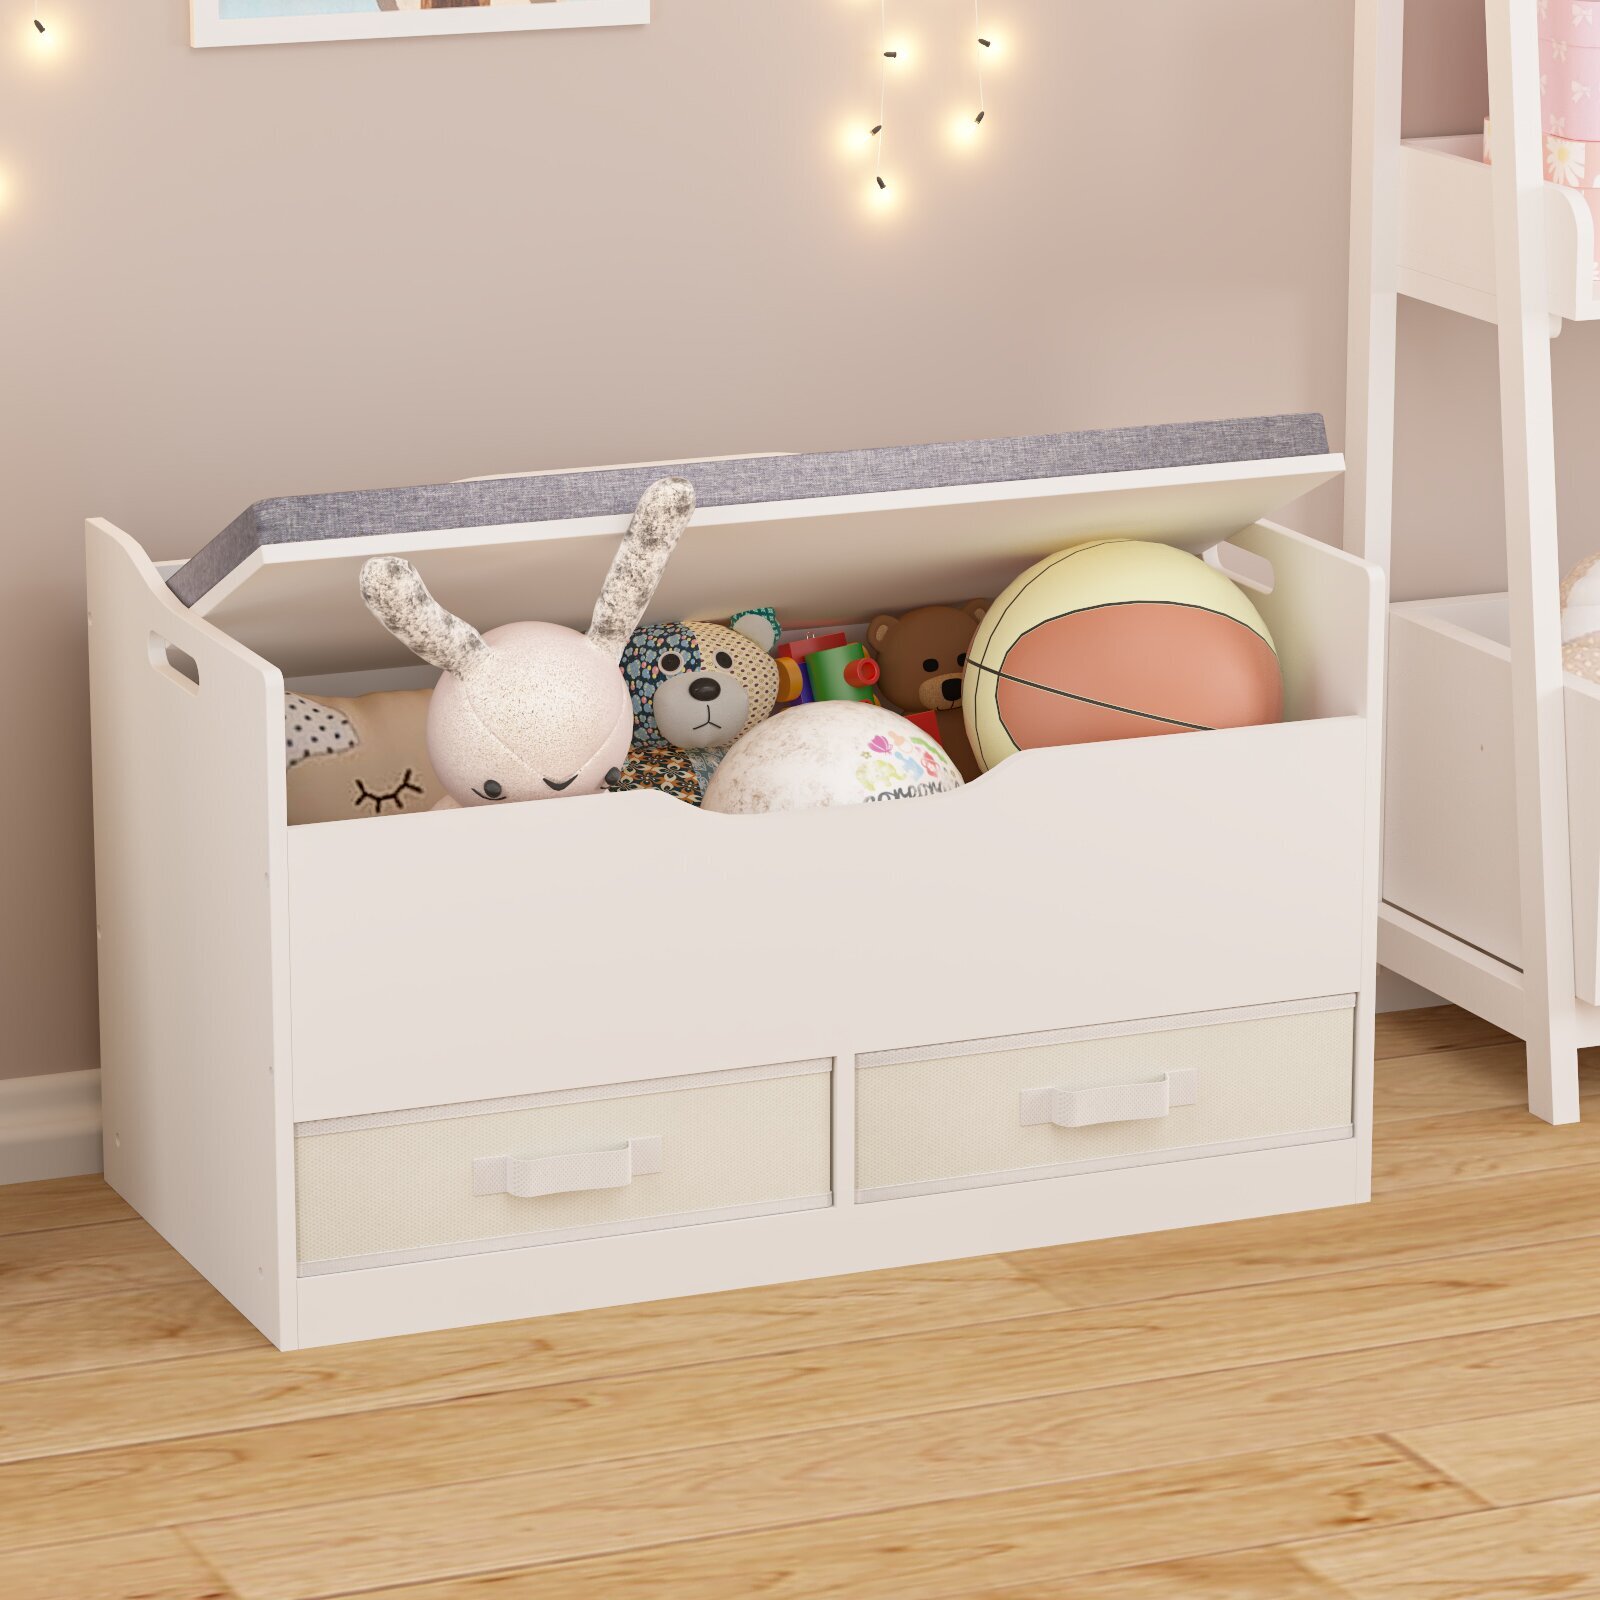 NEW Storage Chest Kids Toy Box Wood Bookcase Large Bedroom Home Furniture White 